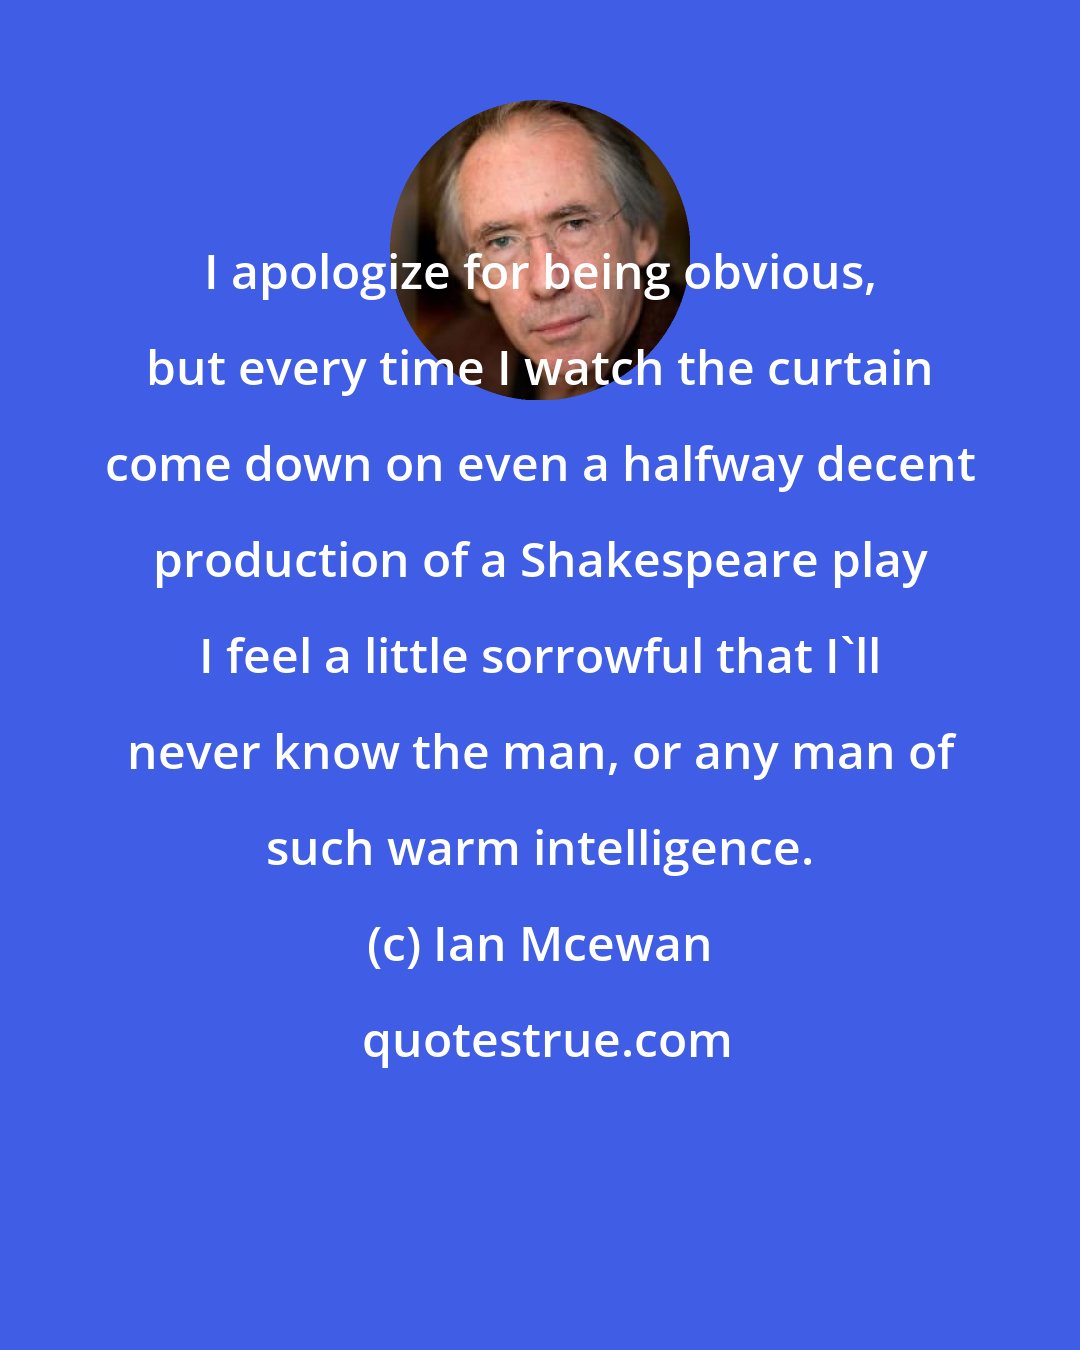 Ian Mcewan: I apologize for being obvious, but every time I watch the curtain come down on even a halfway decent production of a Shakespeare play I feel a little sorrowful that I'll never know the man, or any man of such warm intelligence.